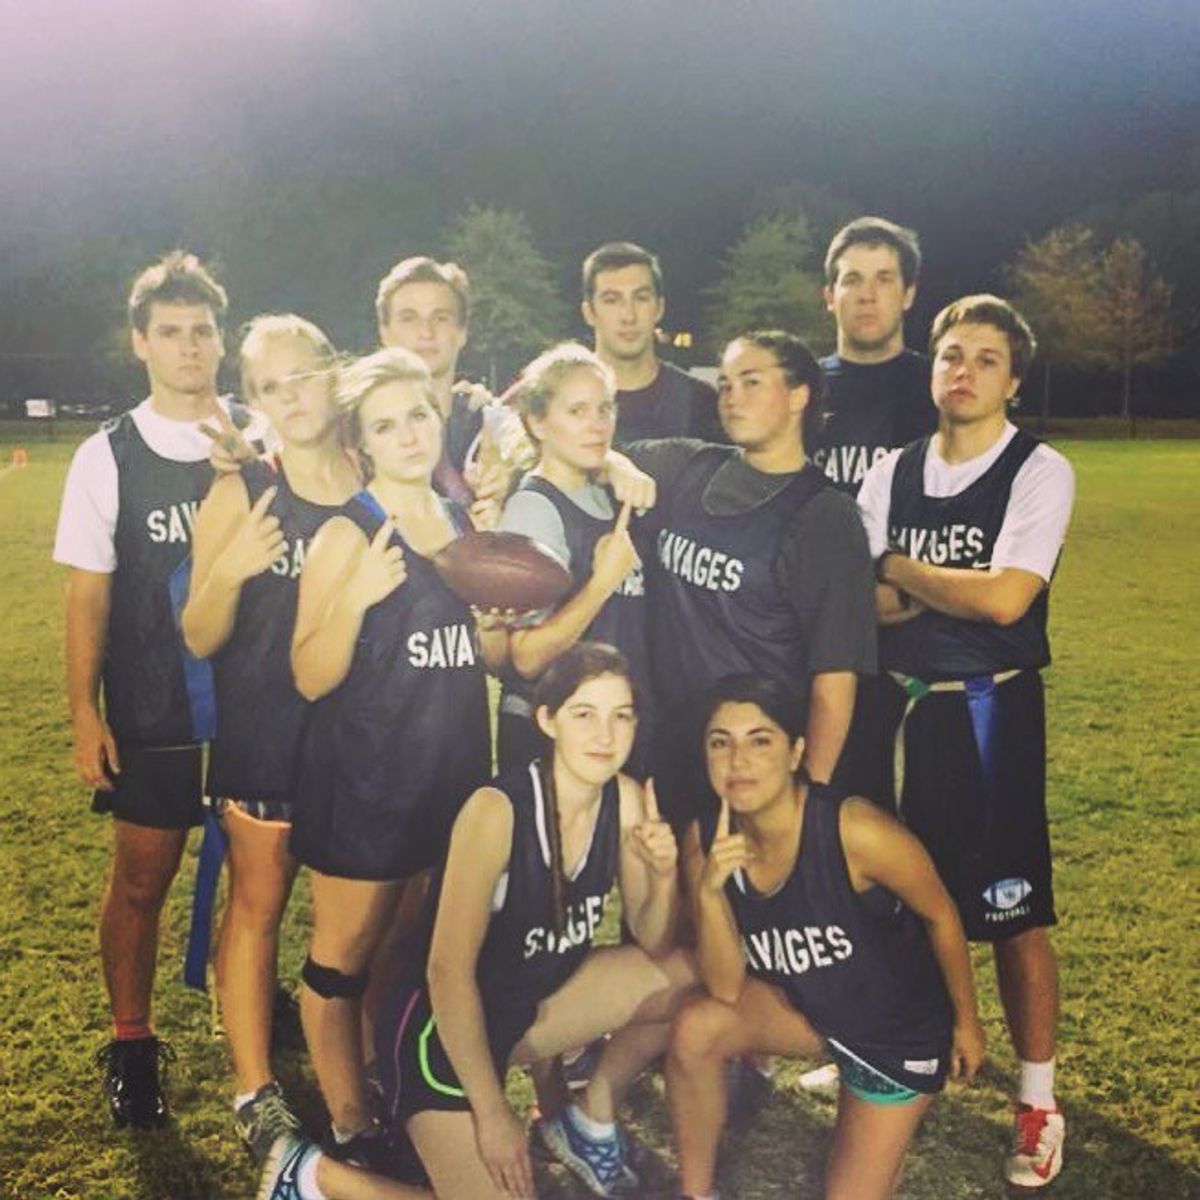 11 Reasons You Should Play Intramurals In College